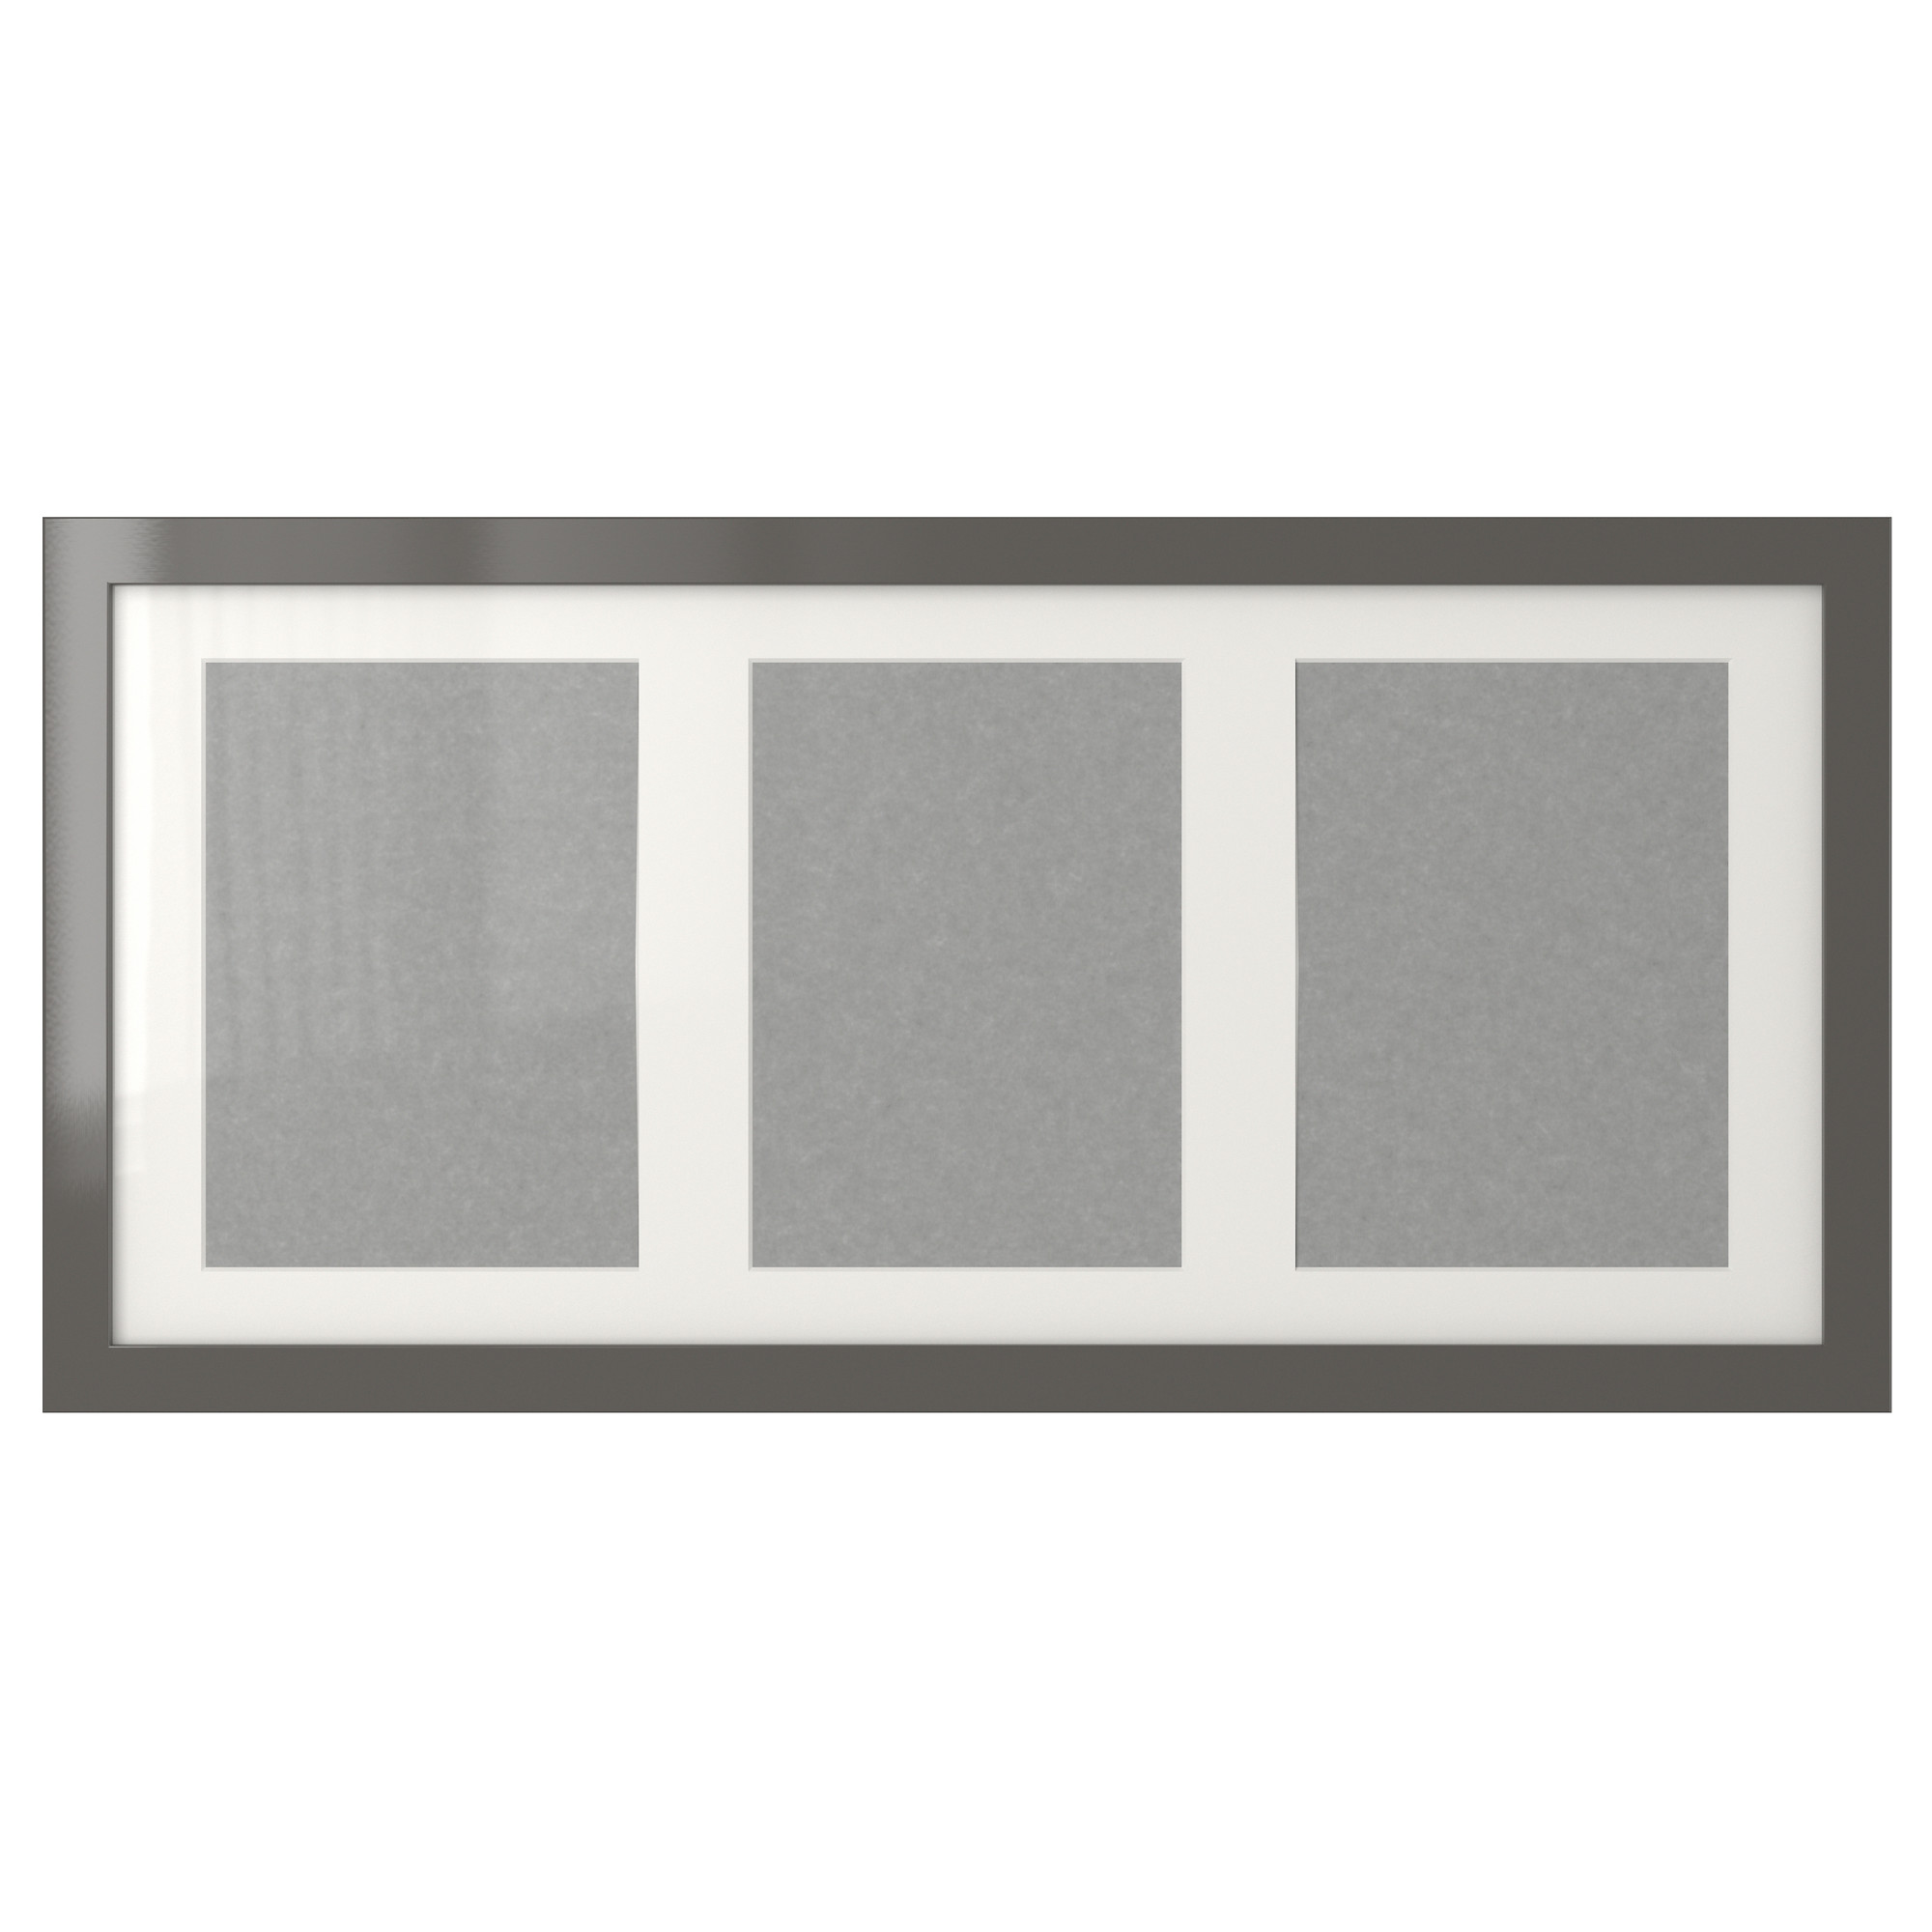 Frames & Pictures - Wall Frames & Photo Frames - IKEA - Cliparts.co